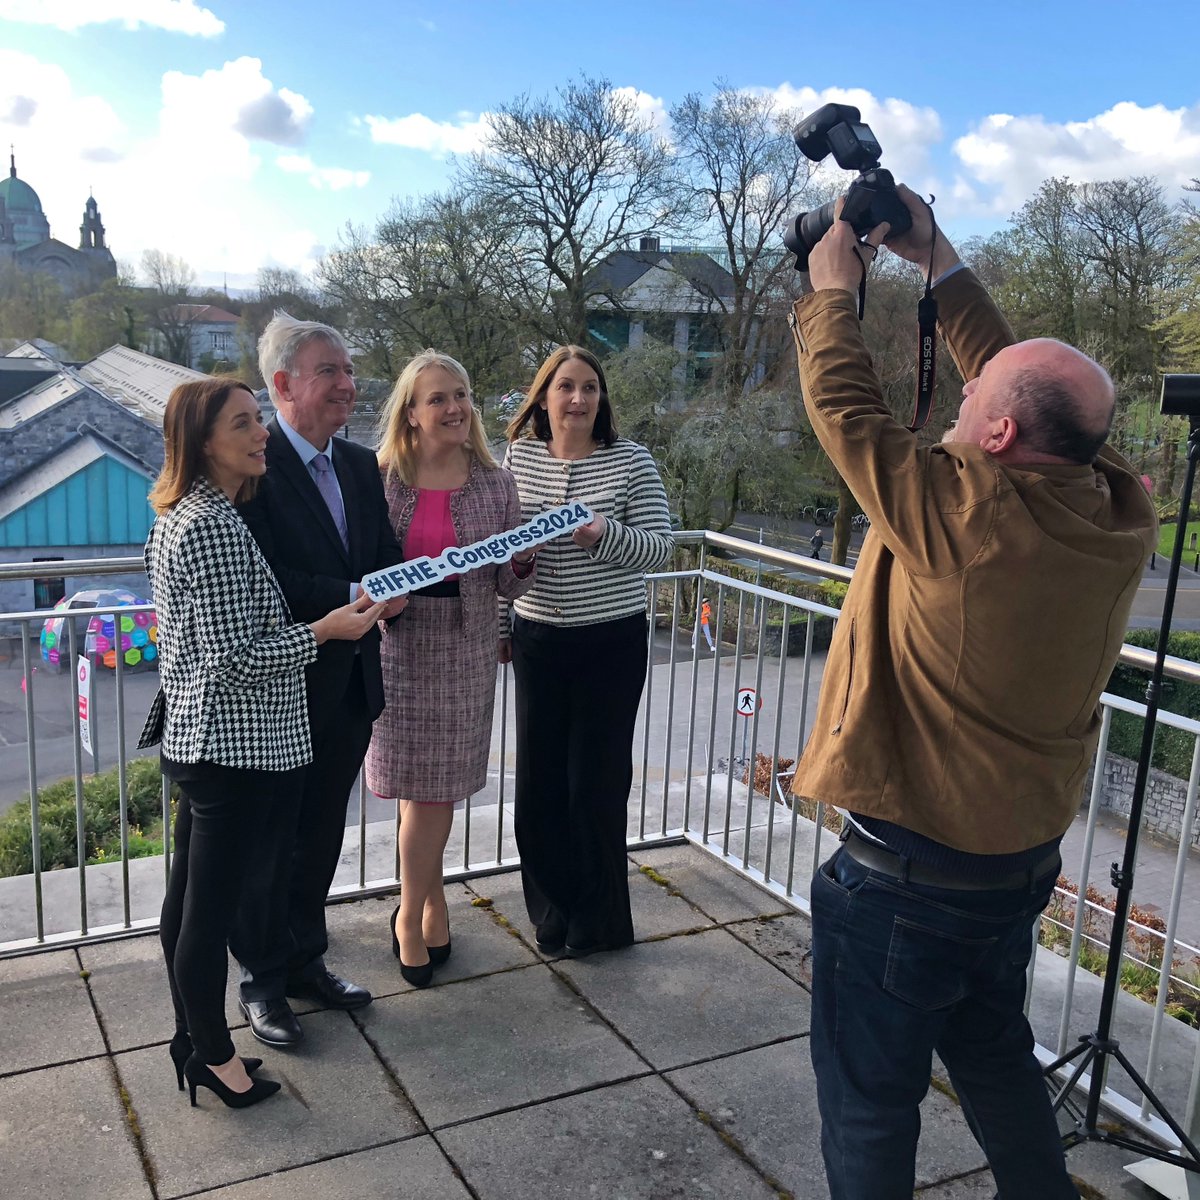 Galway is gearing up for the @IFHE_HomeEc World Congress in June. Led by @ATUStAngelas and hosted on @uniofgalway's campus, #IFHE 2024 will bring 800 global Home Ec researchers & practitioners to Galway city. Let's hope the skies are as blue in June, @amccloat @H_M_Maguire!